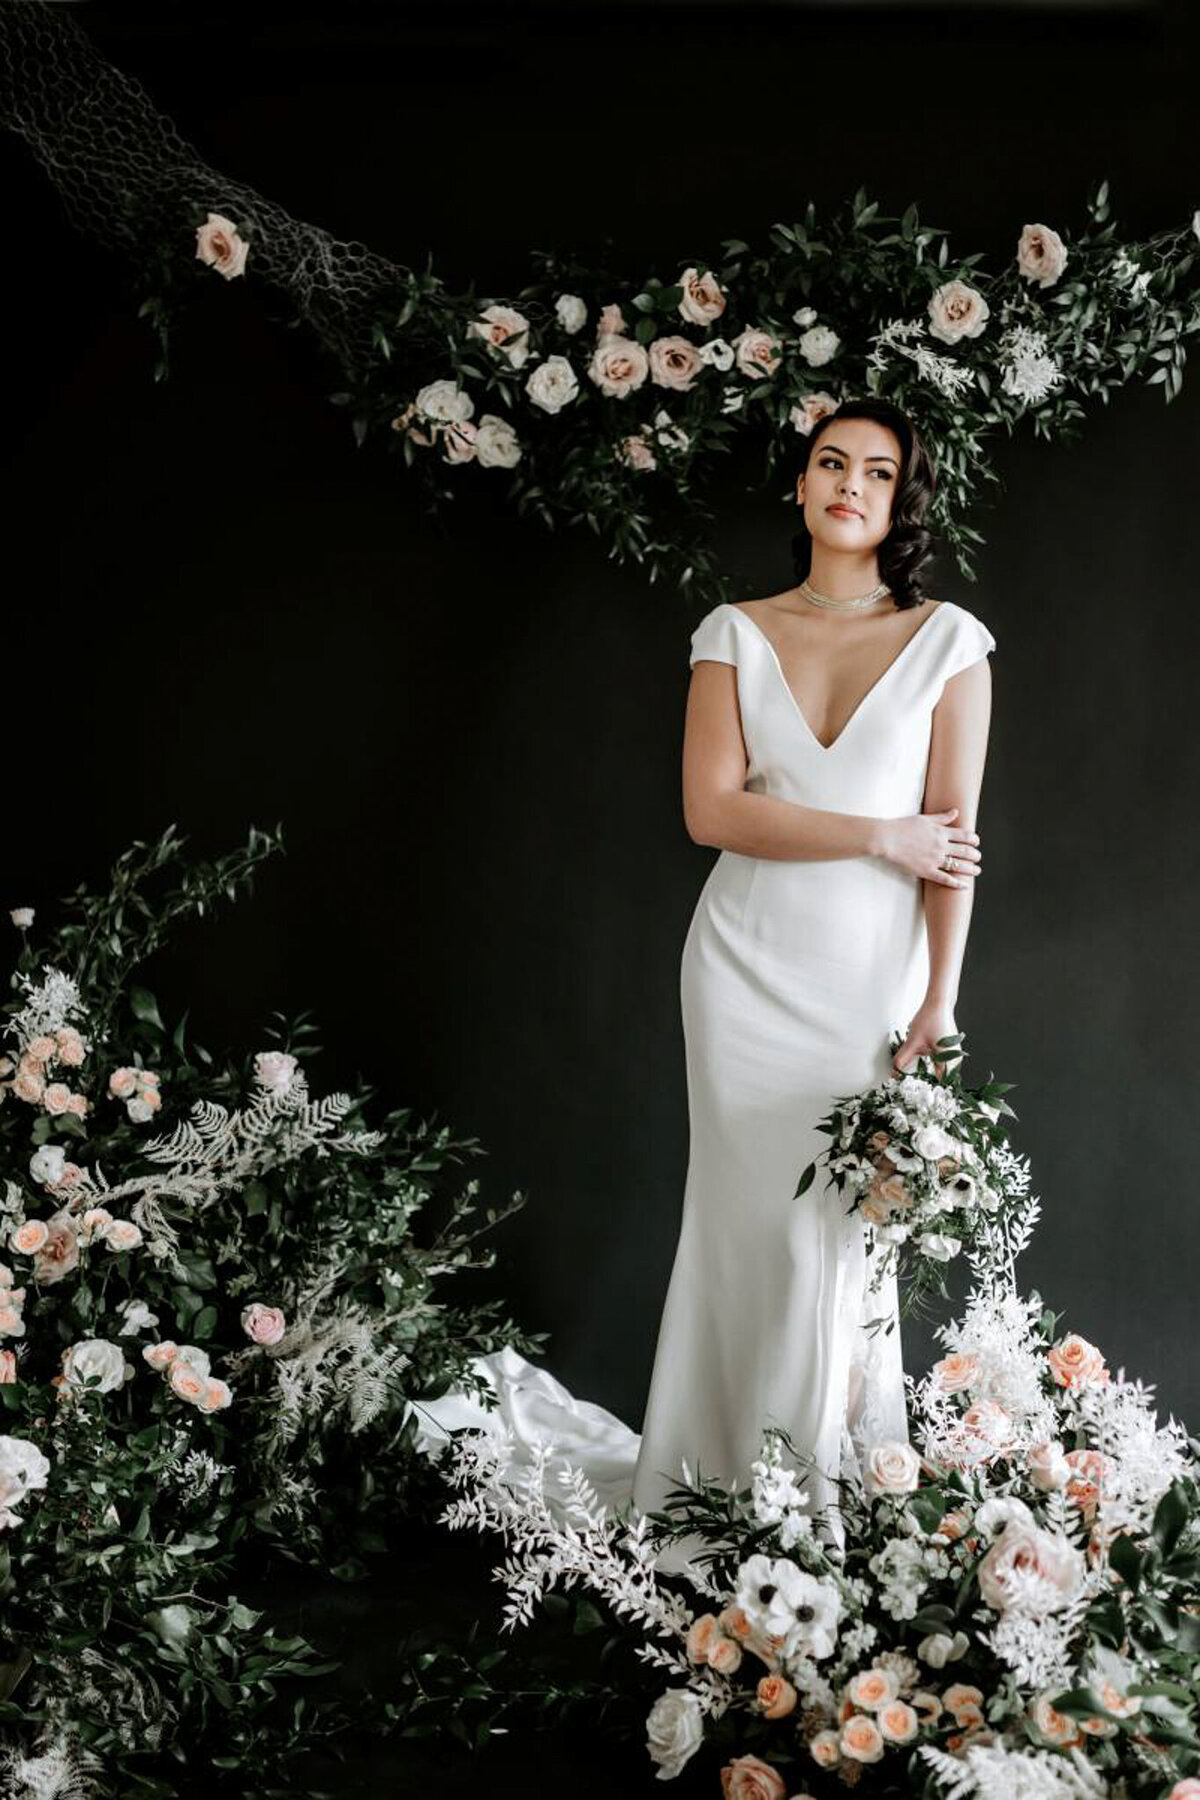 Couture bridal gown by Blush & Raven, a couture wedding bridal boutique based in Calgary, Alberta. Featured on the Brontë Bride Vendor Guide.